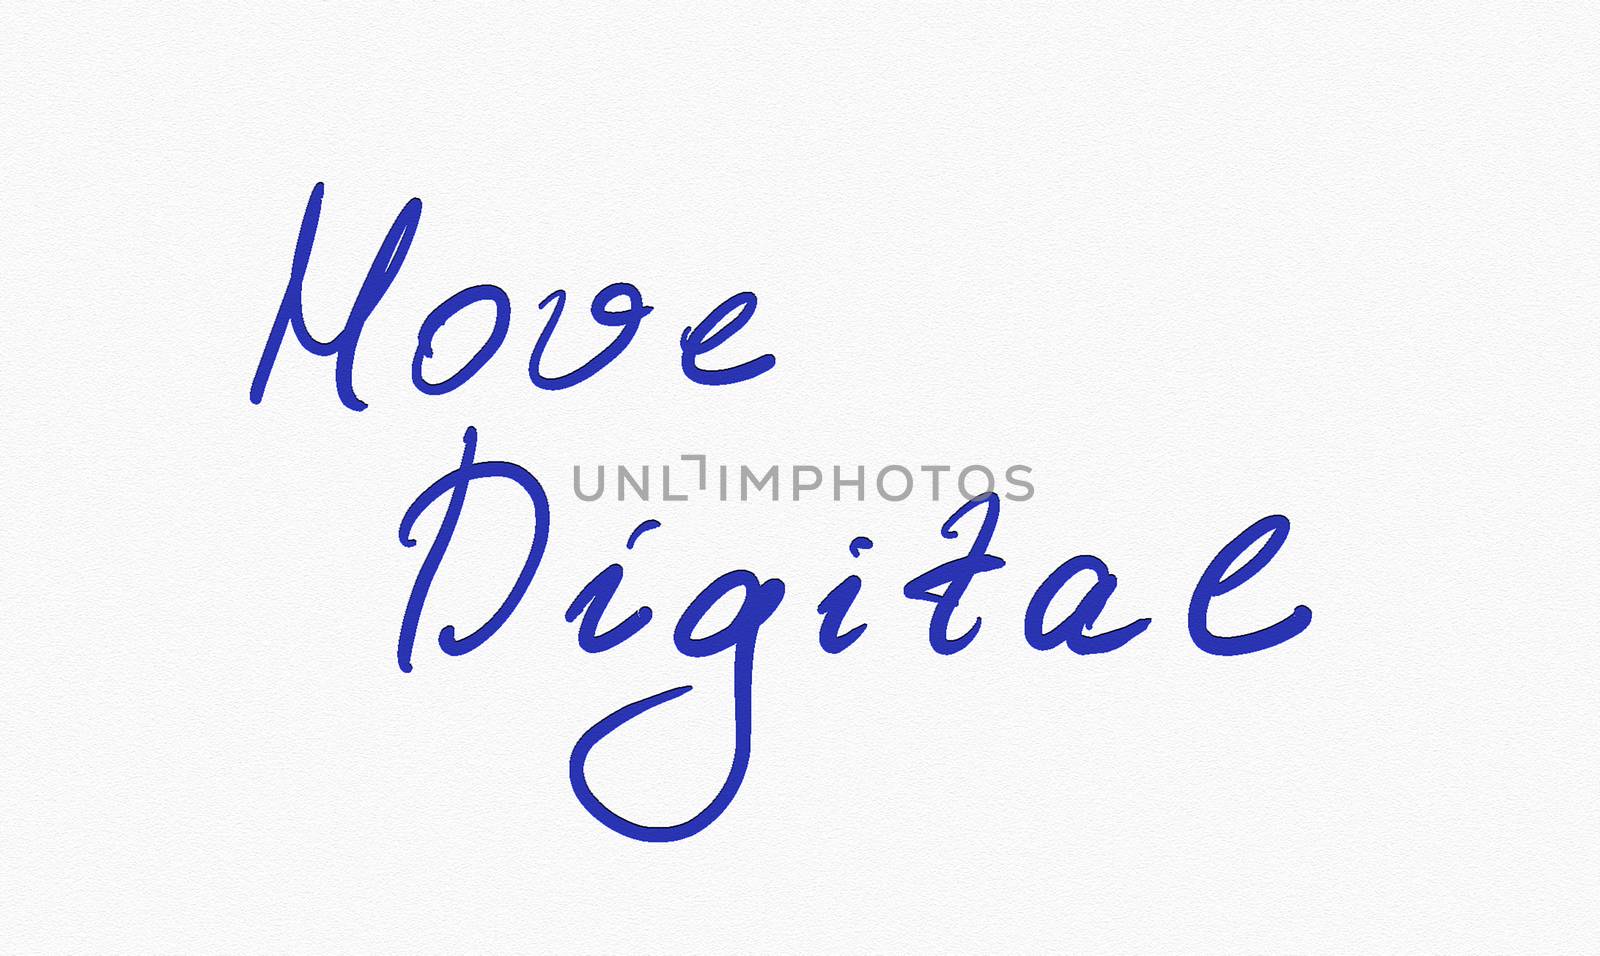 A hand written note of Move Digital words. Modern Digitalization trend business concept. Blue ink on white paper background.